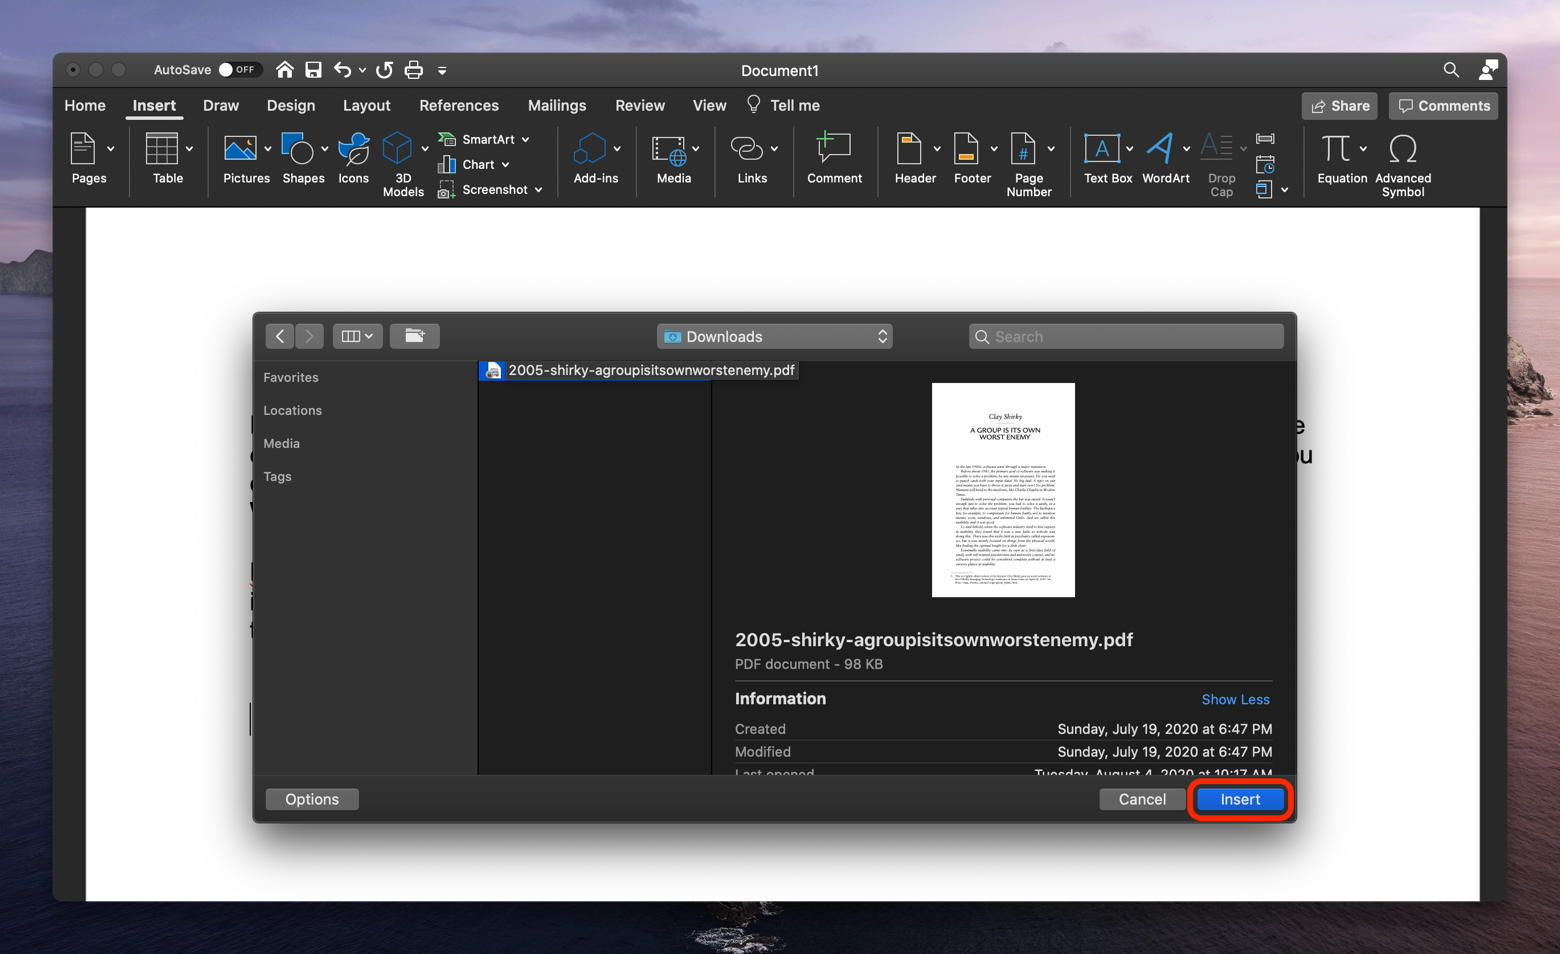 how to insert pdf into word document automatically